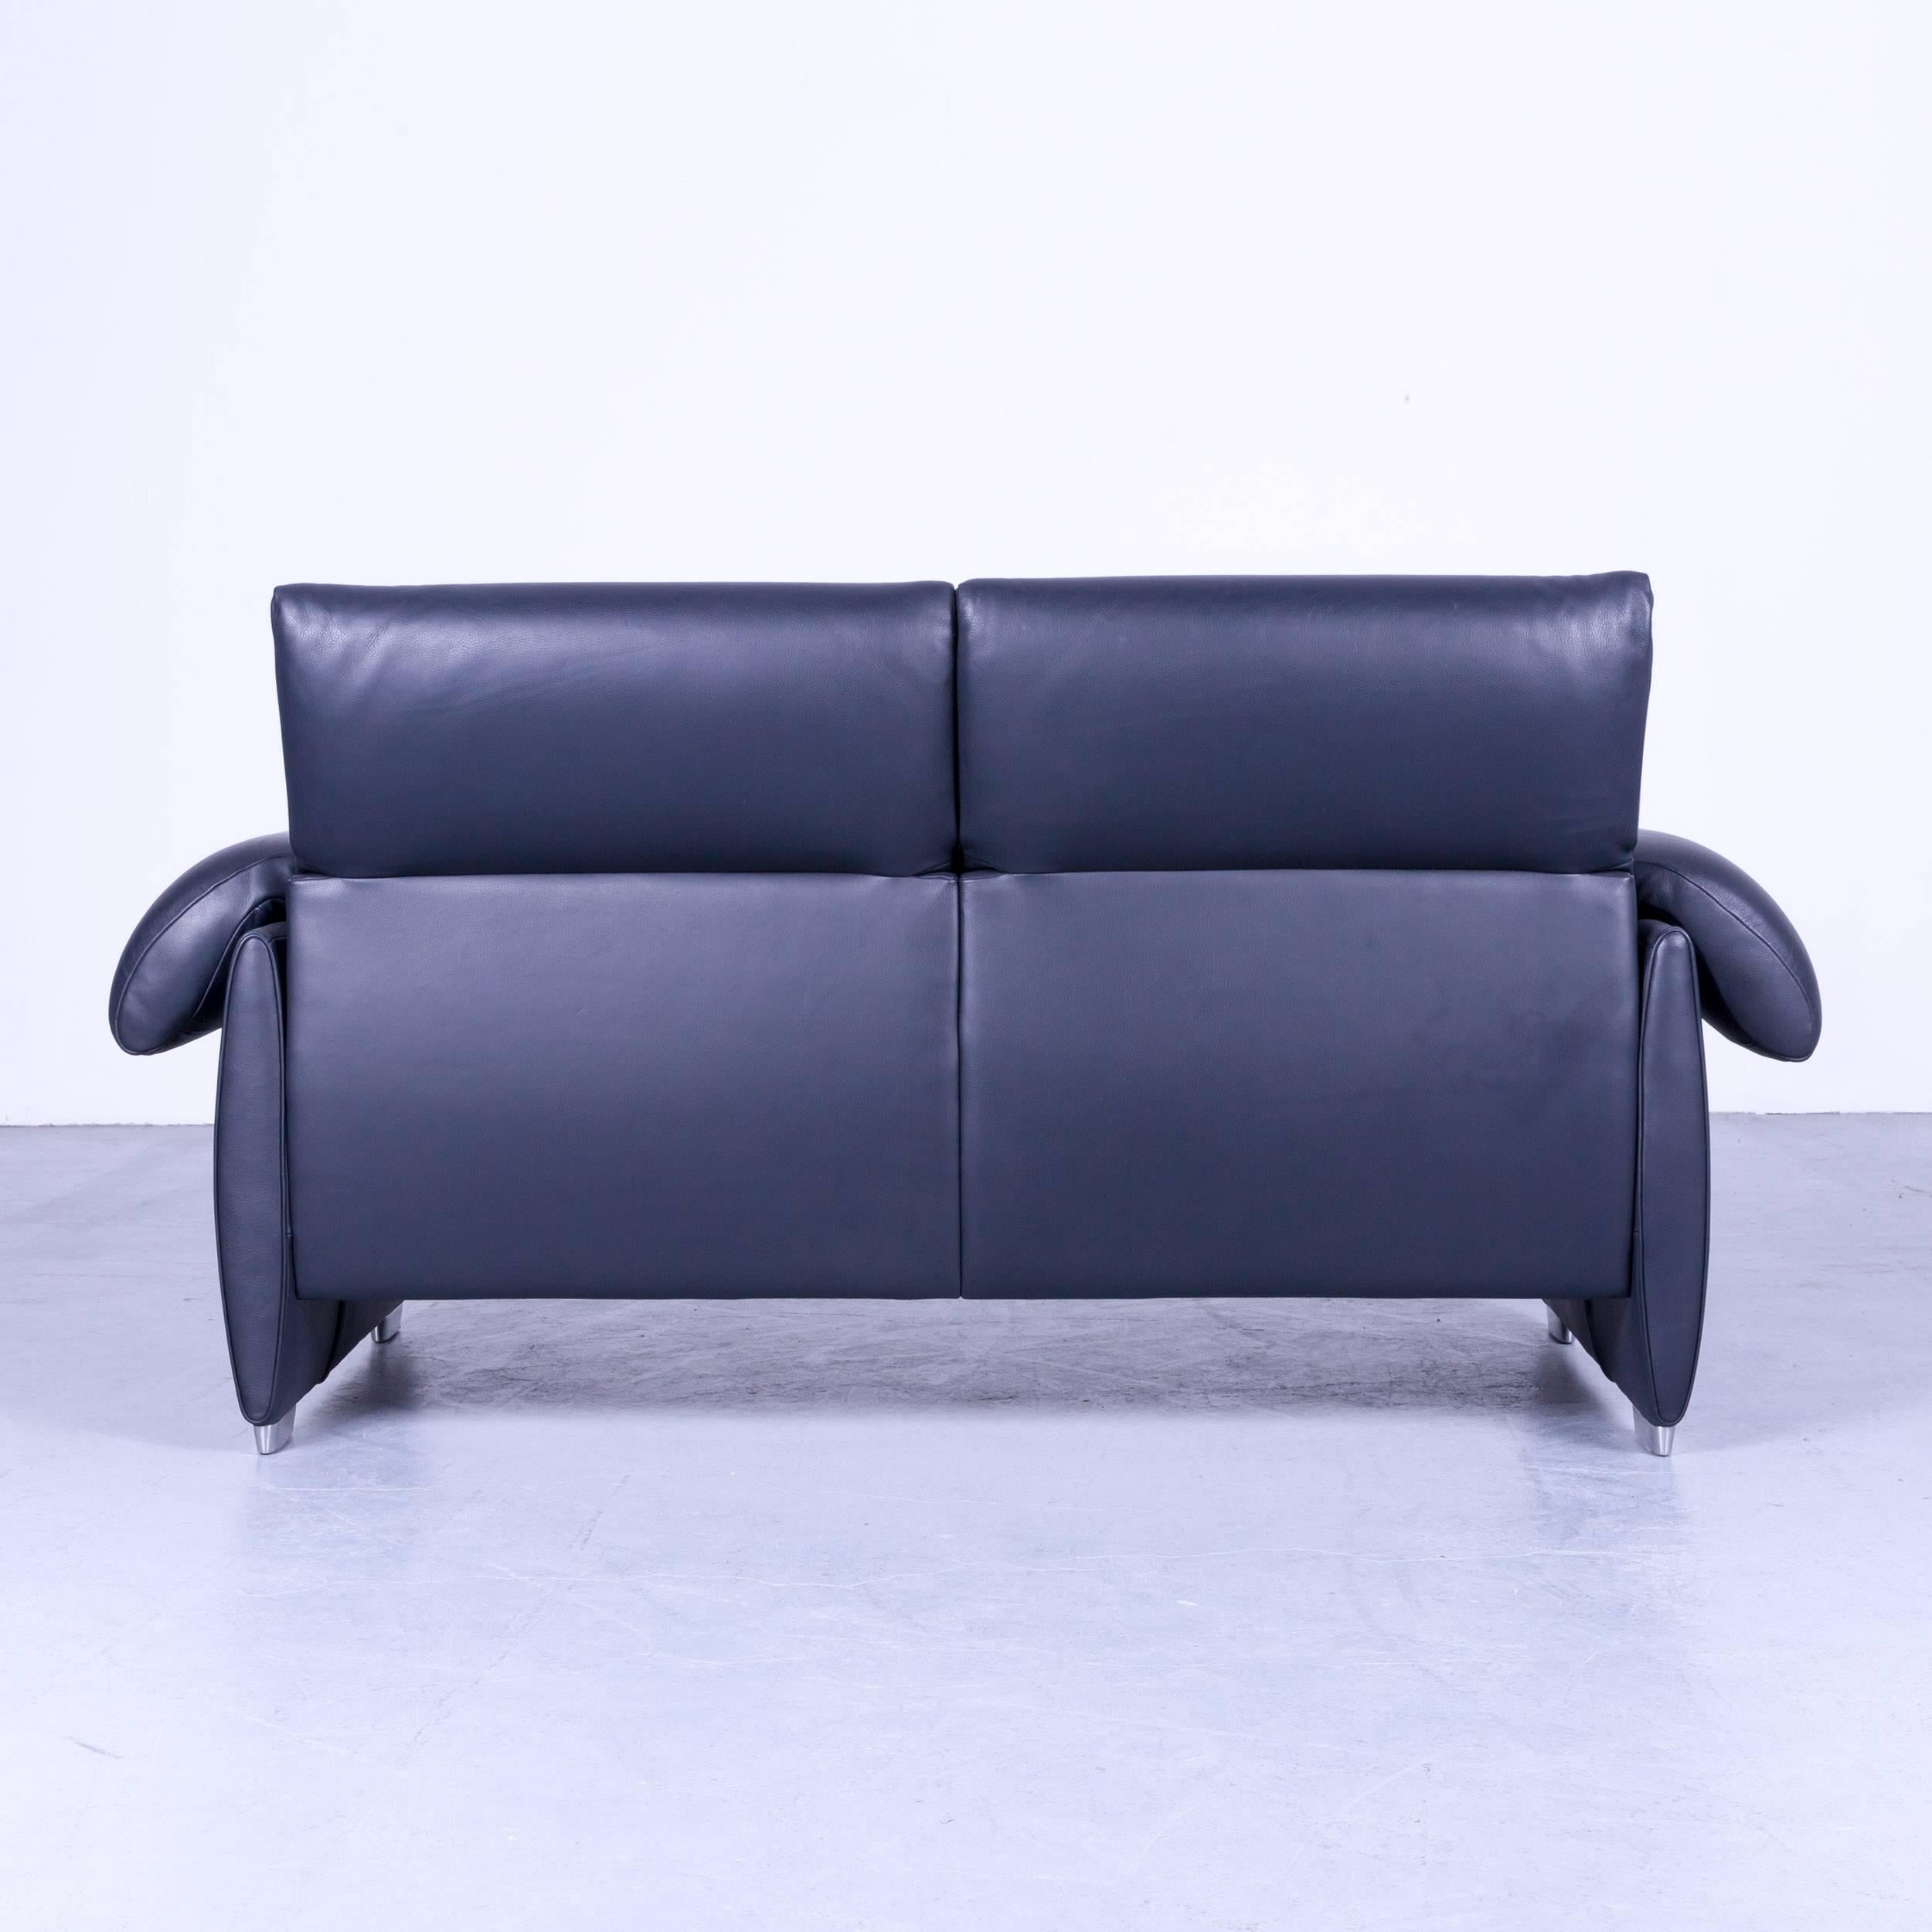 De Sede DS 10 Designer Sofa Navy Blue Leather Two-Seat Couch, Switzerland 1